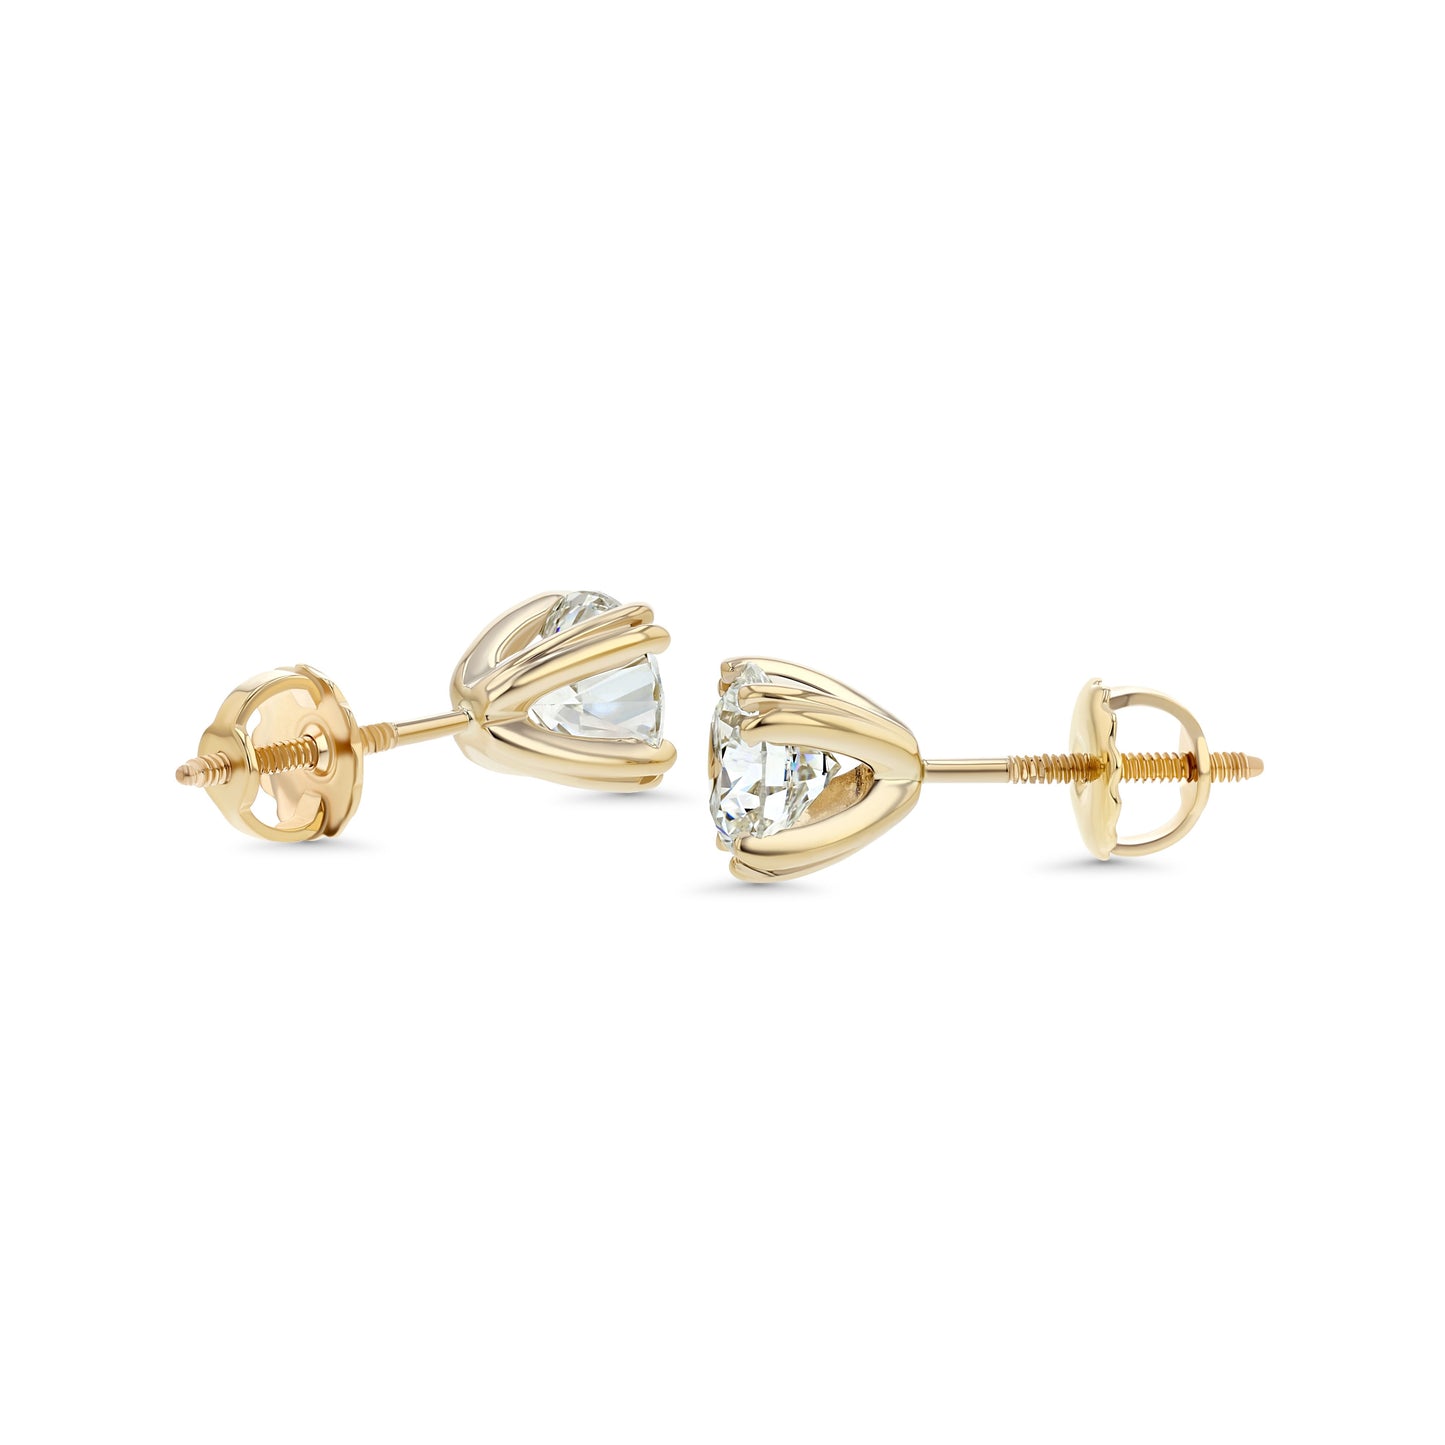 14k Yellow Gold Double Prong Round Diamond Stud Earrings 1/2ctw (4.1mm Ea), M-n Color, Si2-si3 Clarity